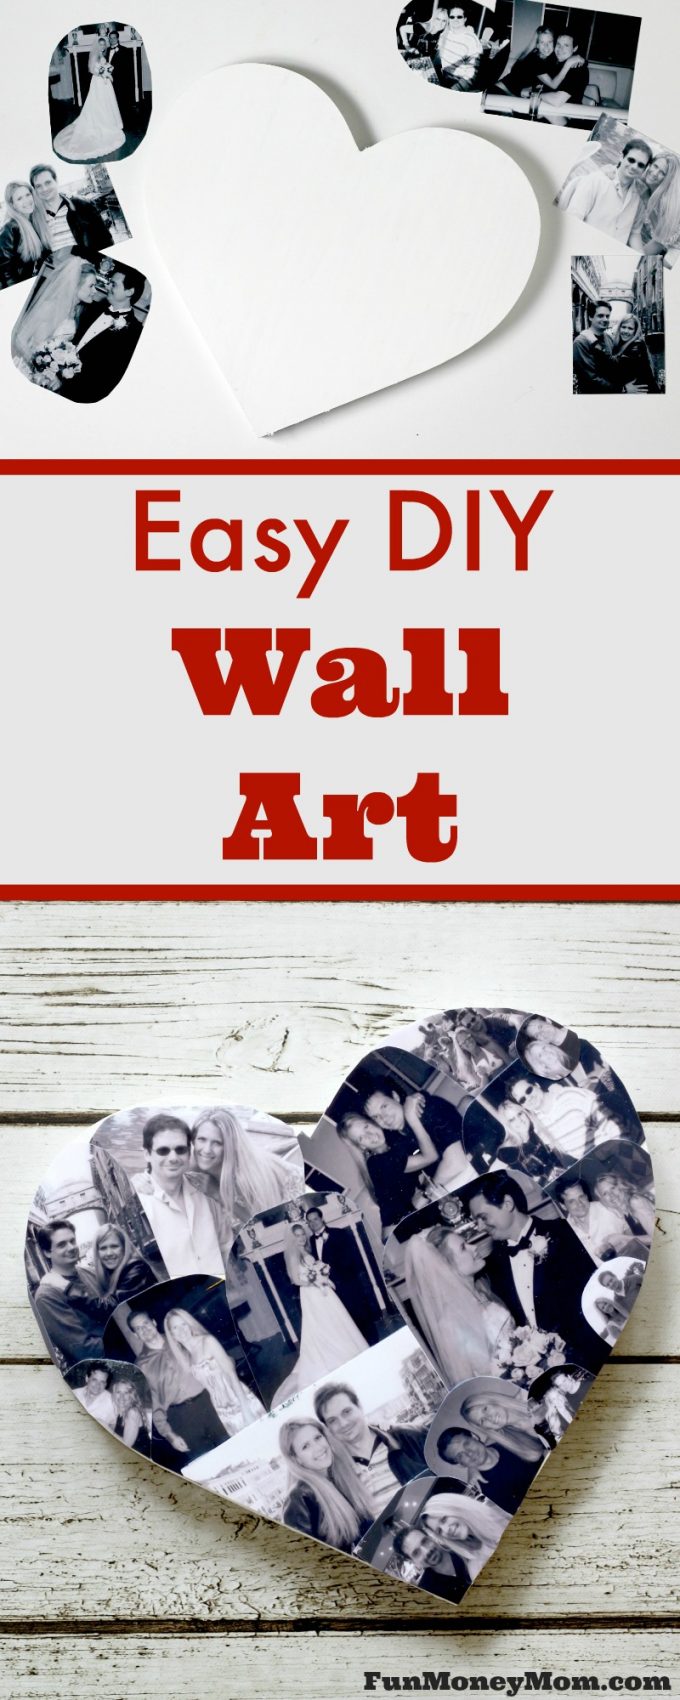 Looking for a great gift idea or just want some new wall decor? This DIY Wall Art is easy to make and looks beautiful on any wall! It even makes a great kids craft.